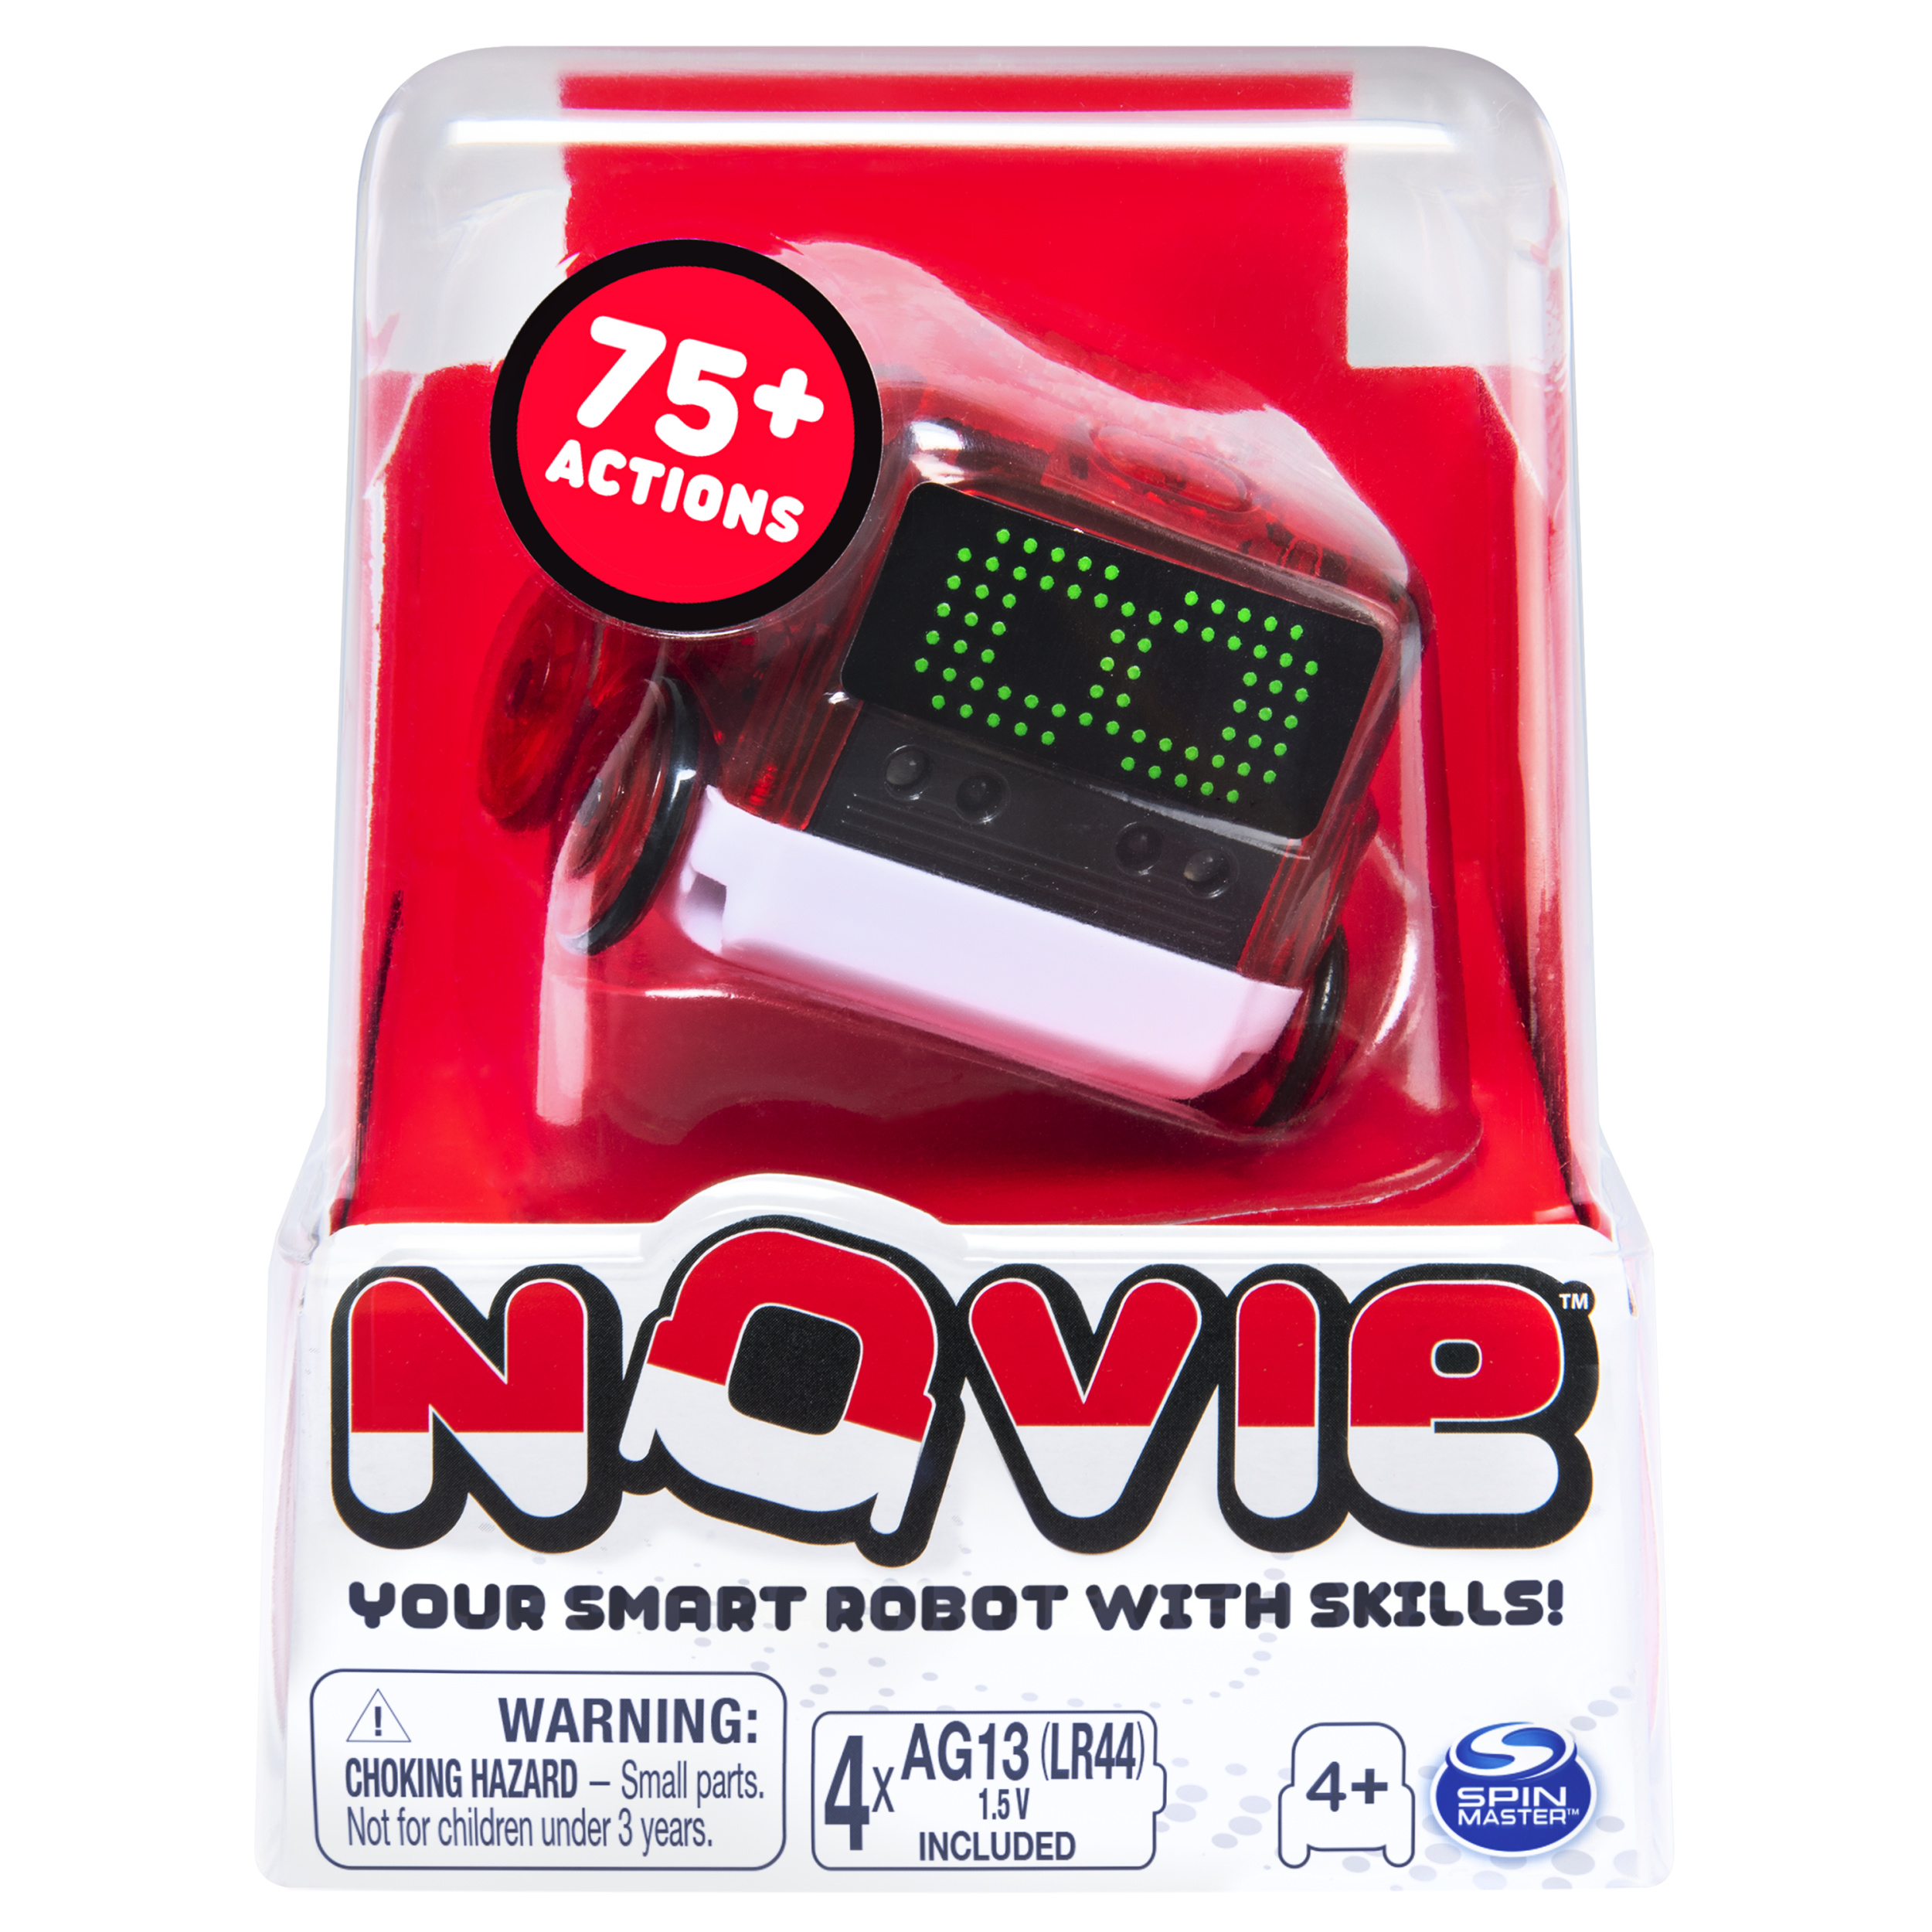 Novie Interactive Smart Robot with Over 75 Actions and Learns 12 Tricks (Red) - image 1 of 7